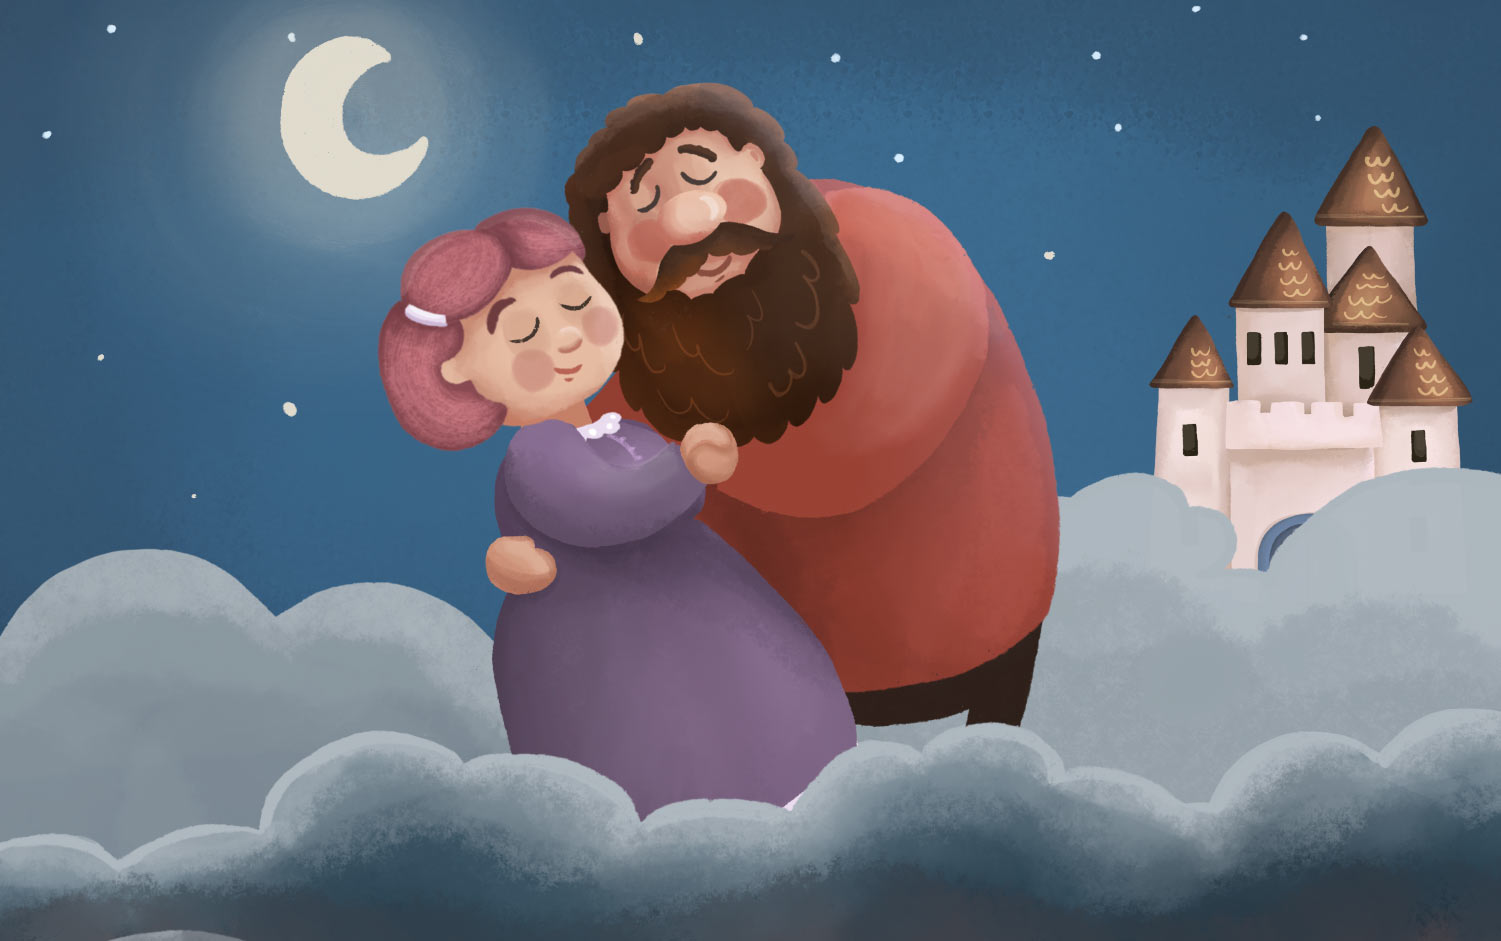 Illustration two giants dancing in the clouds, under the moon and stars, with the castle in the distance. They are smiling contentedly and haven't aged a day.